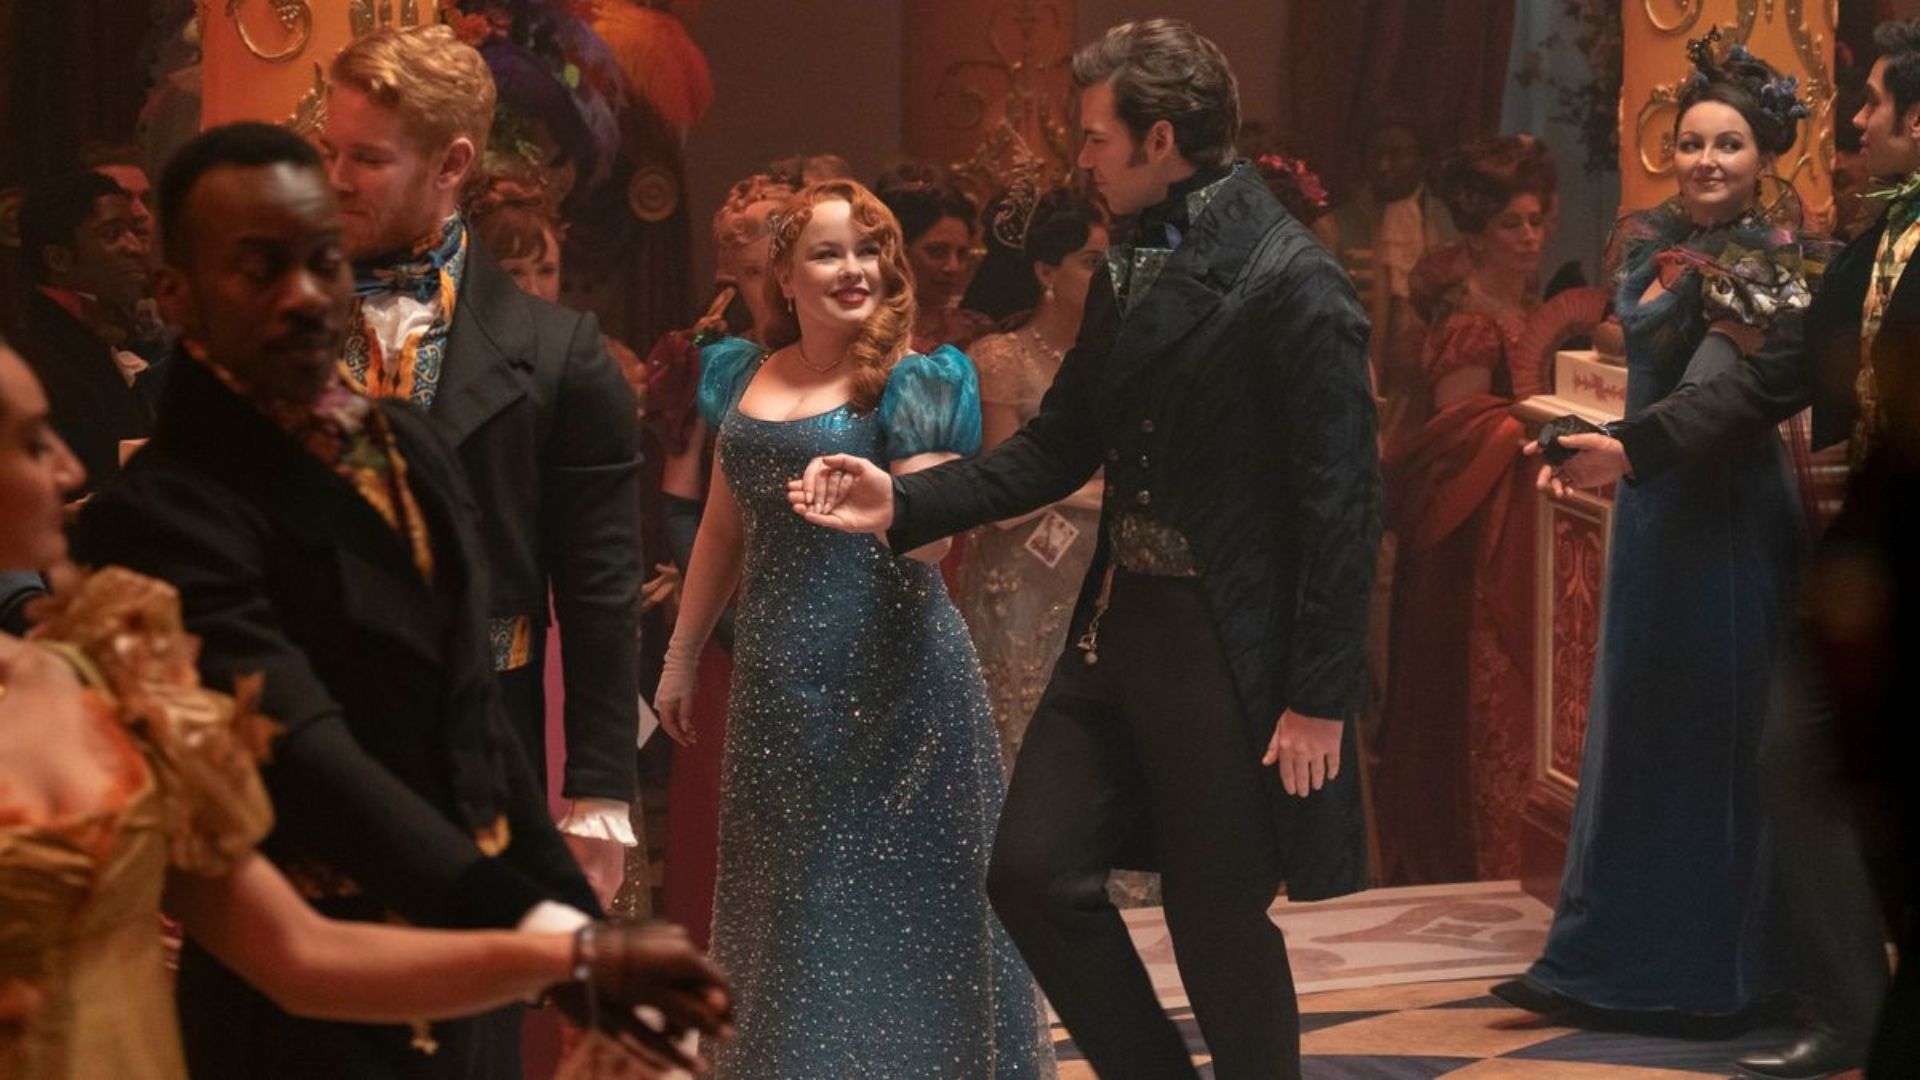 Penelope and Colin dancing after her reveal as Lady Whisteldown in Bridgerton Season 3